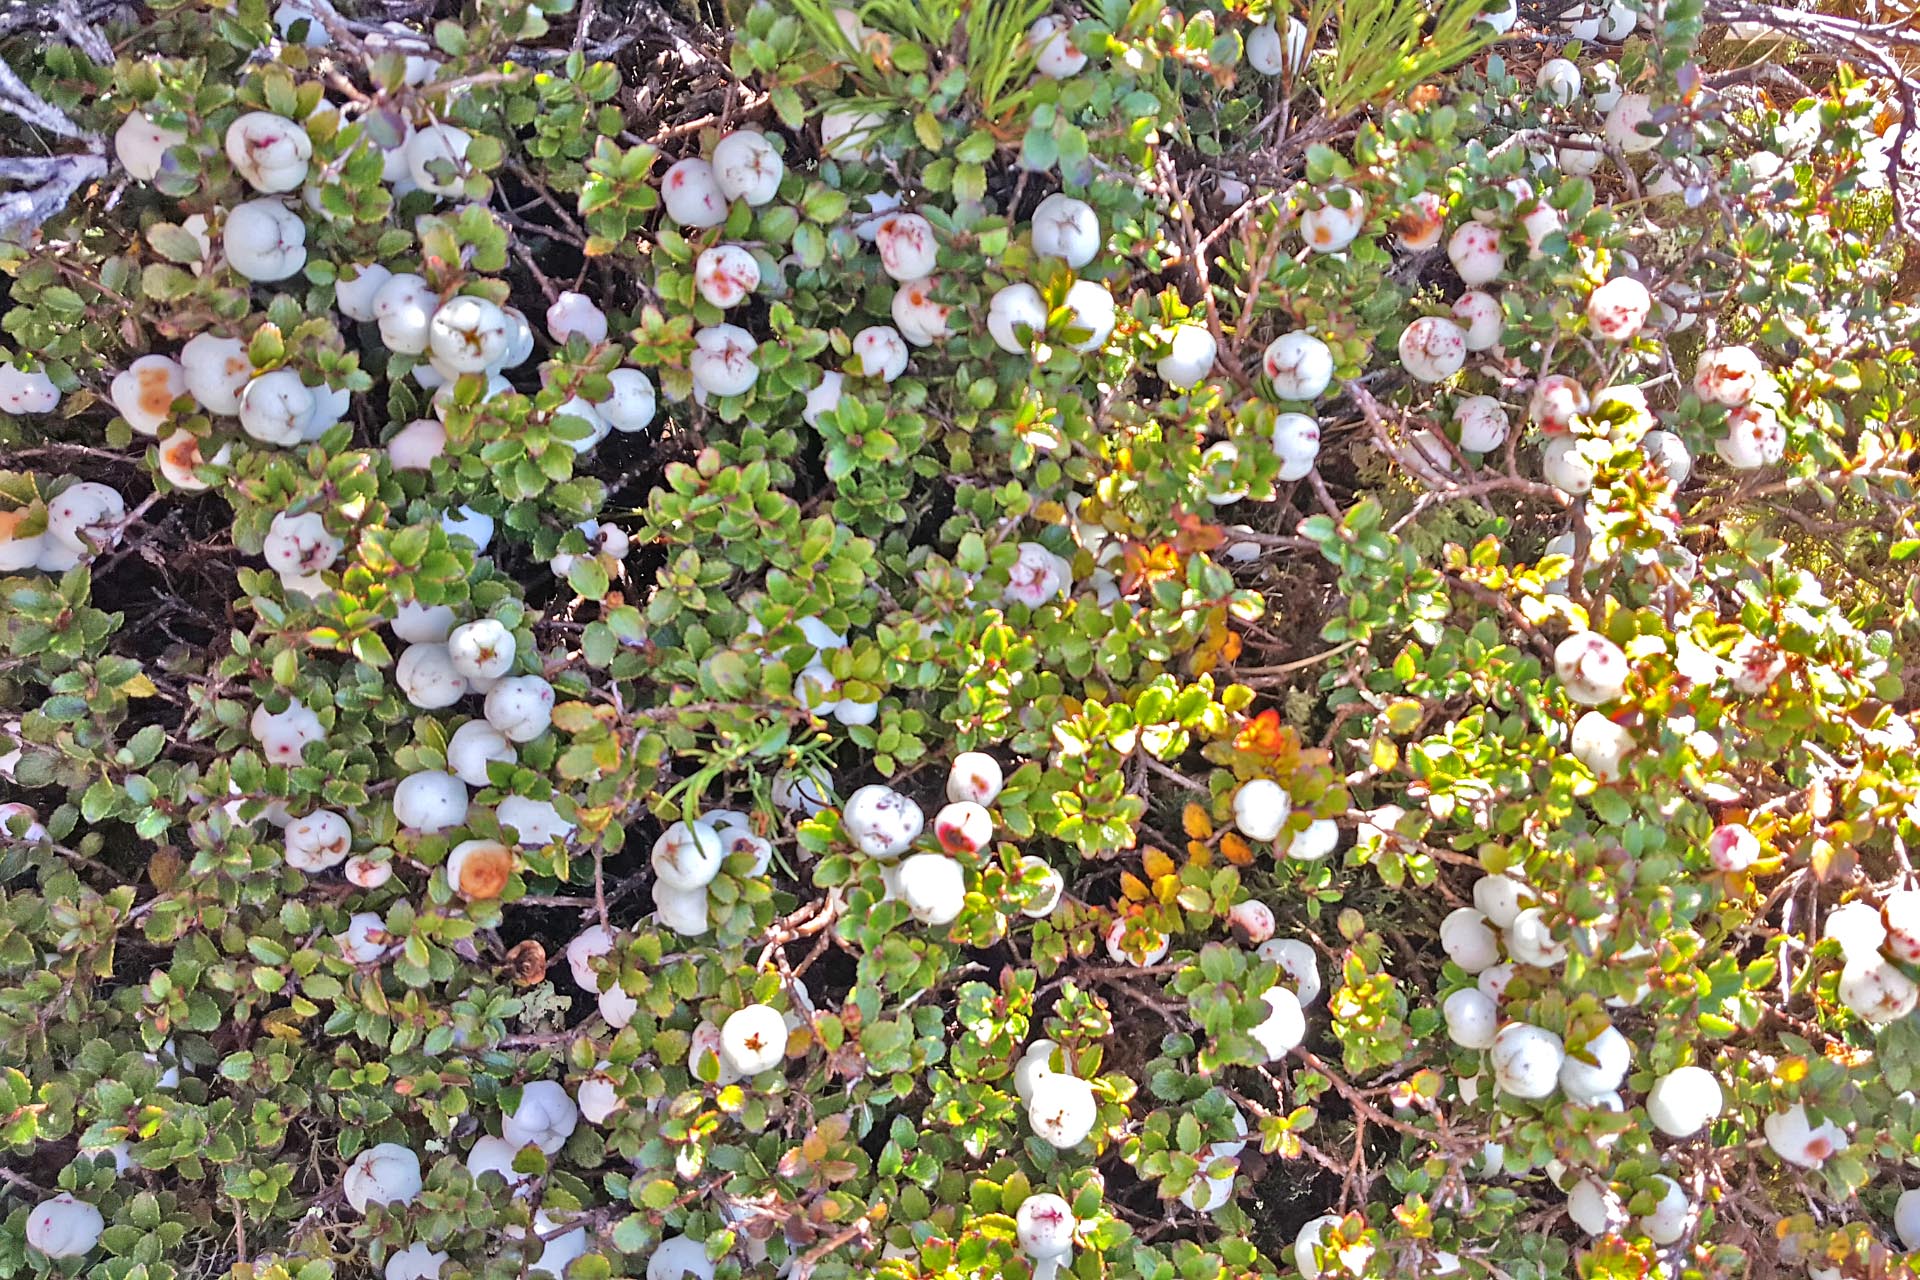 Yummy snowberries on the track to Maungahuka Hut - more than we could eat